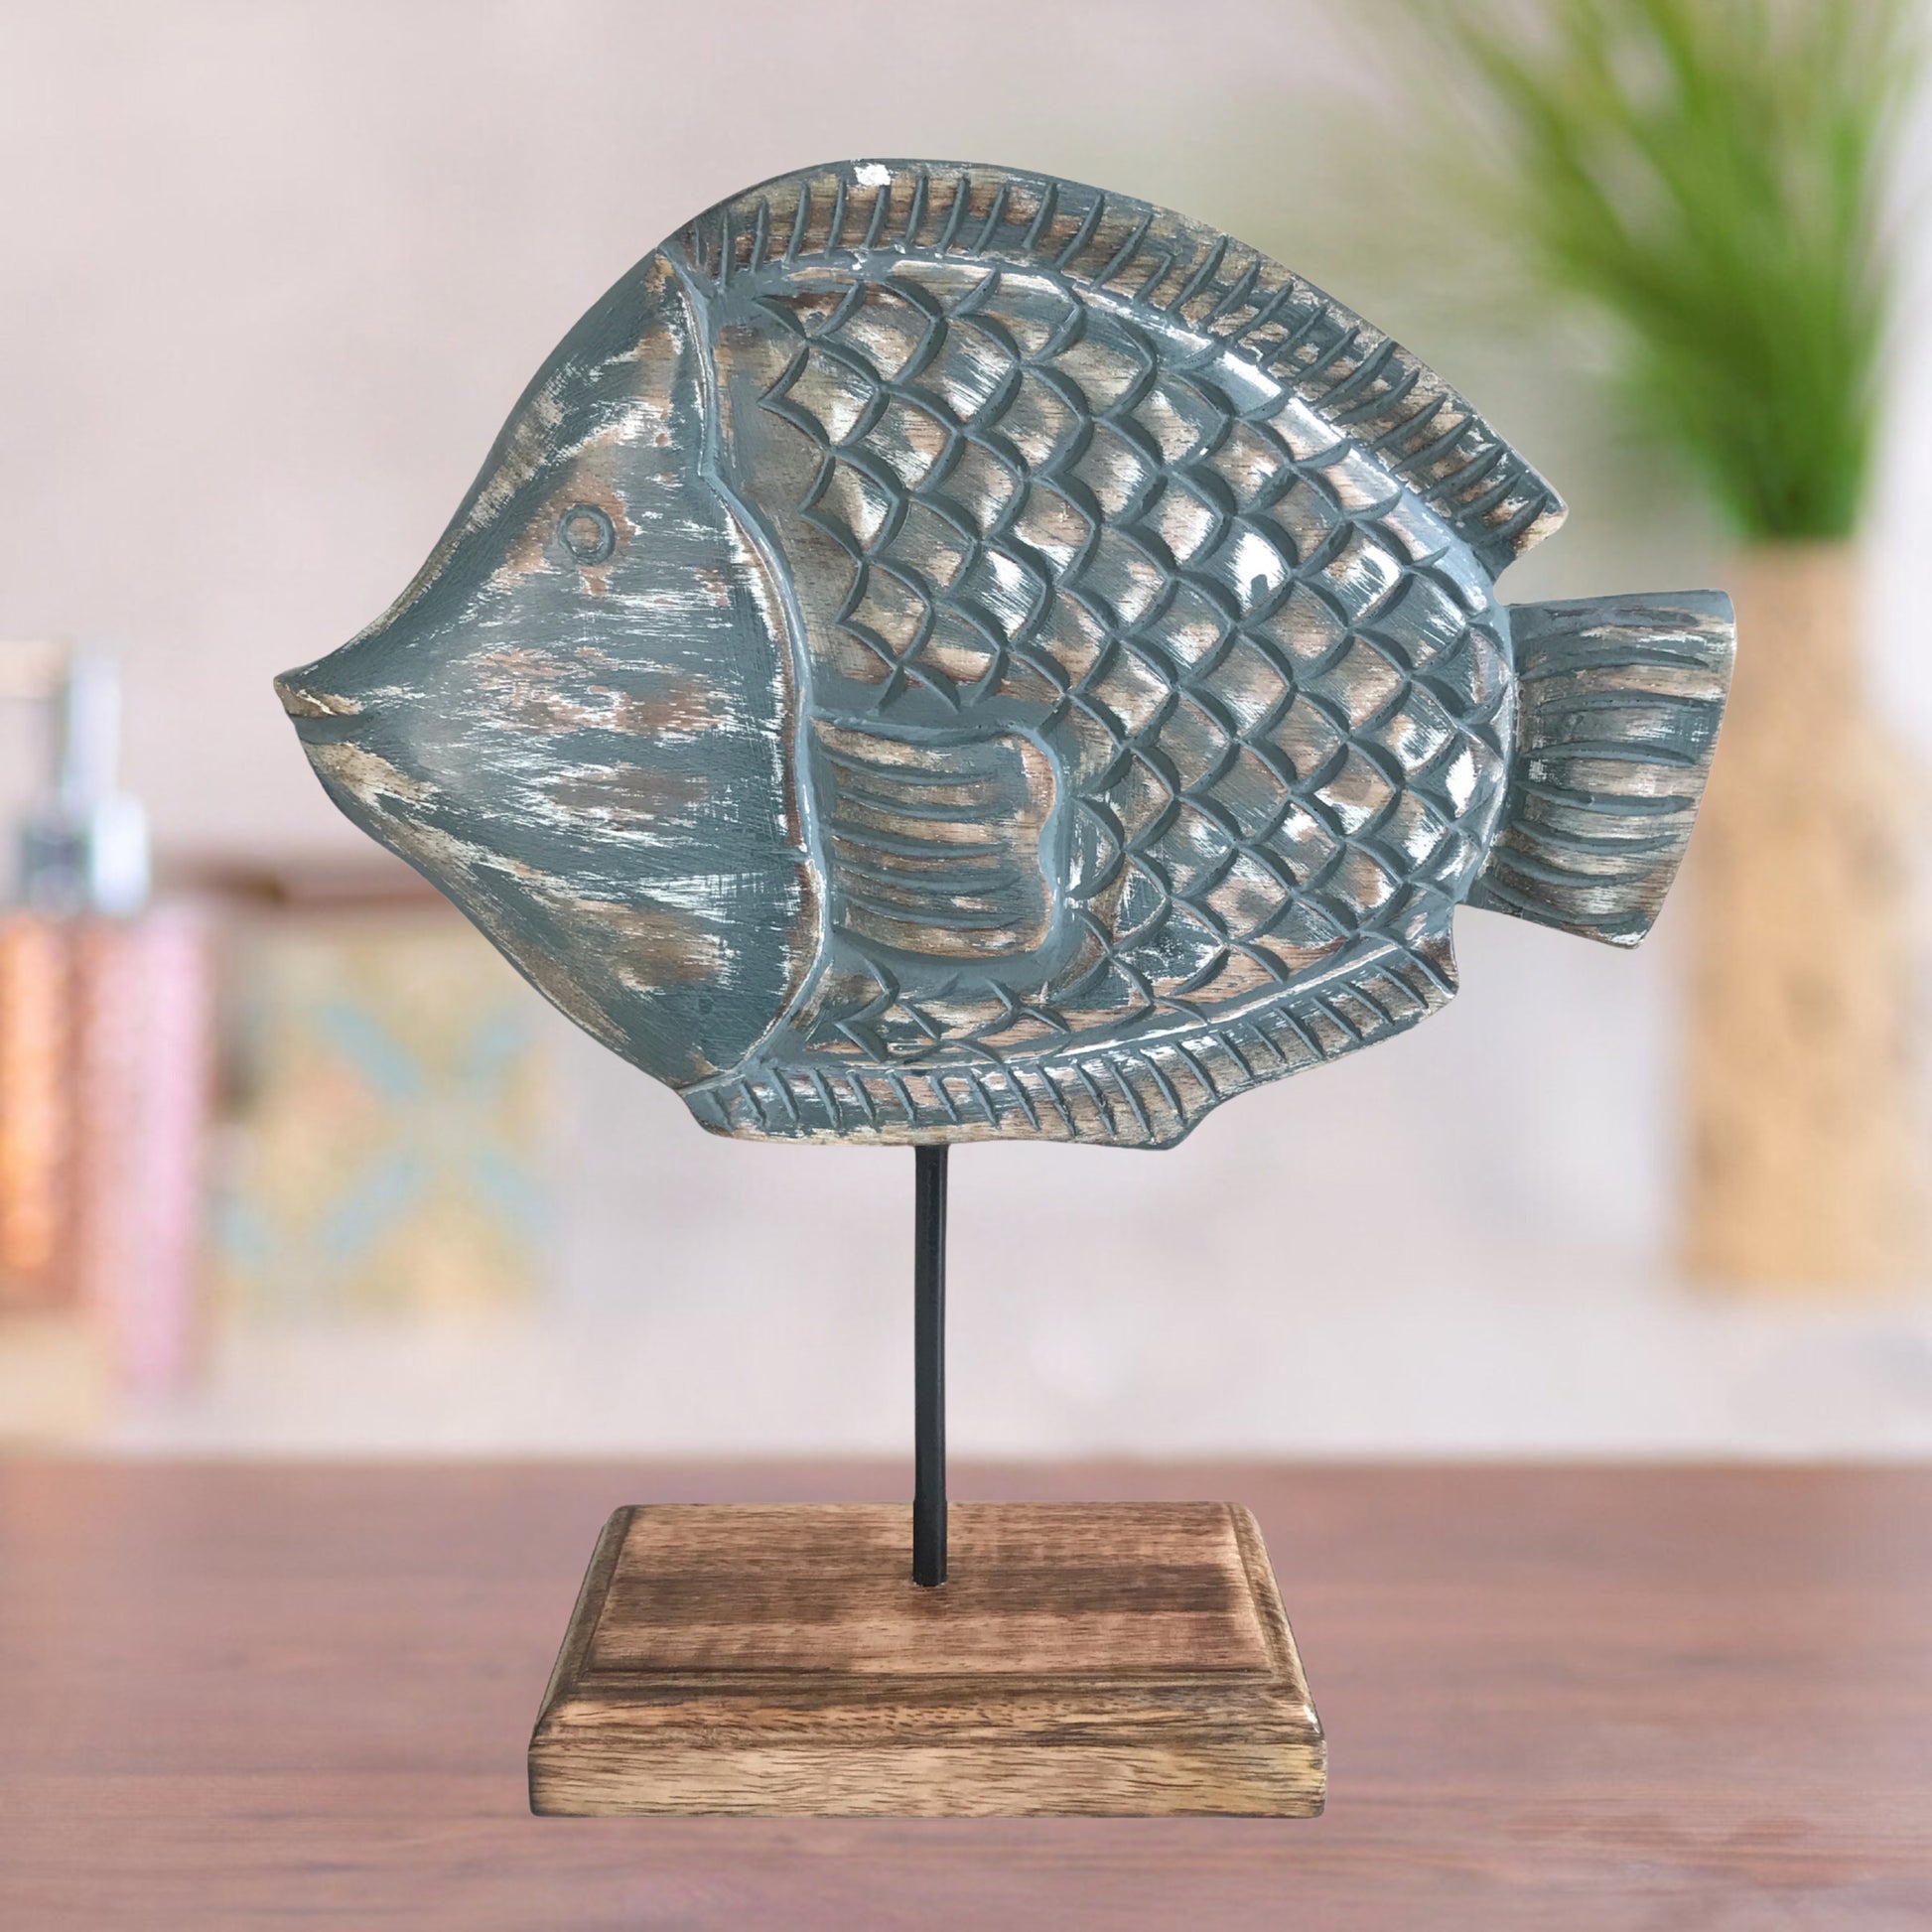 Kezevel Wooden Fish Table Decor - Blue and Brown Showpieces for